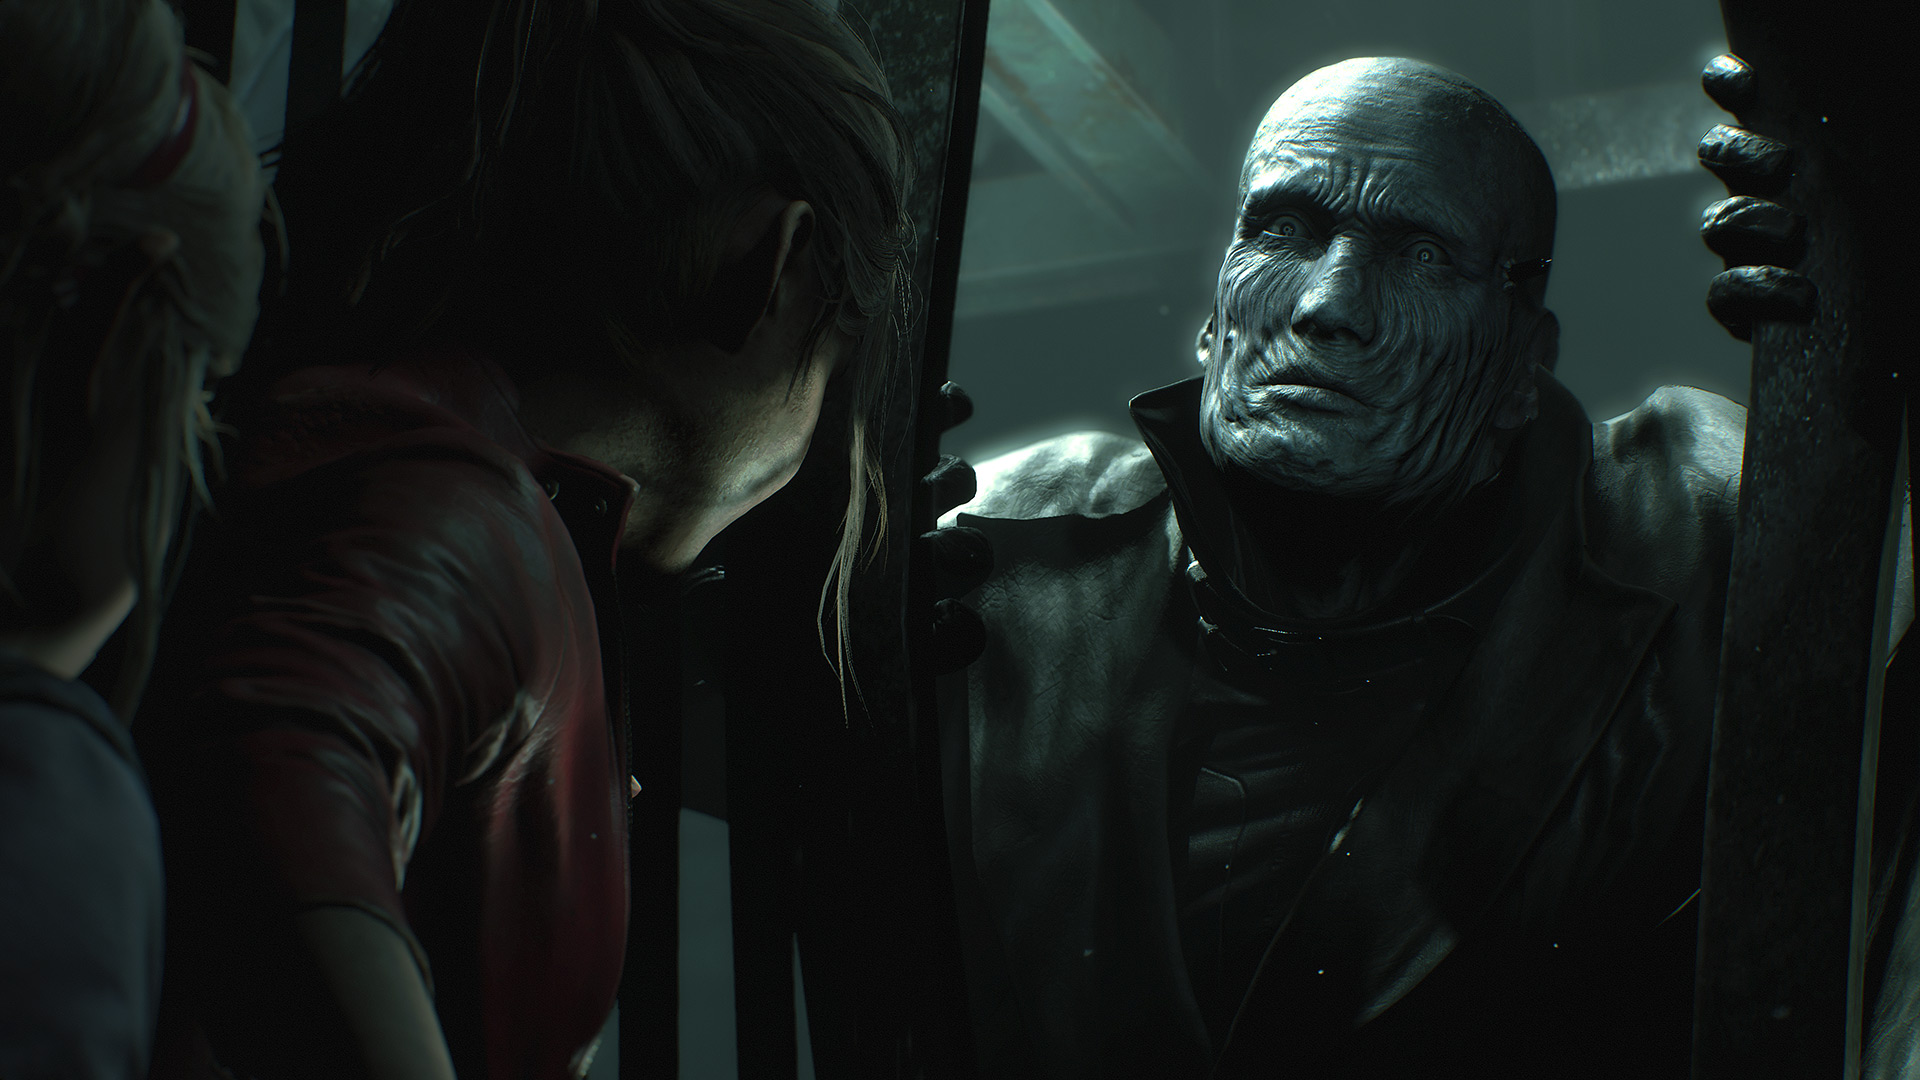 An absolute legend has finally modded DMX into Resident Evil 2